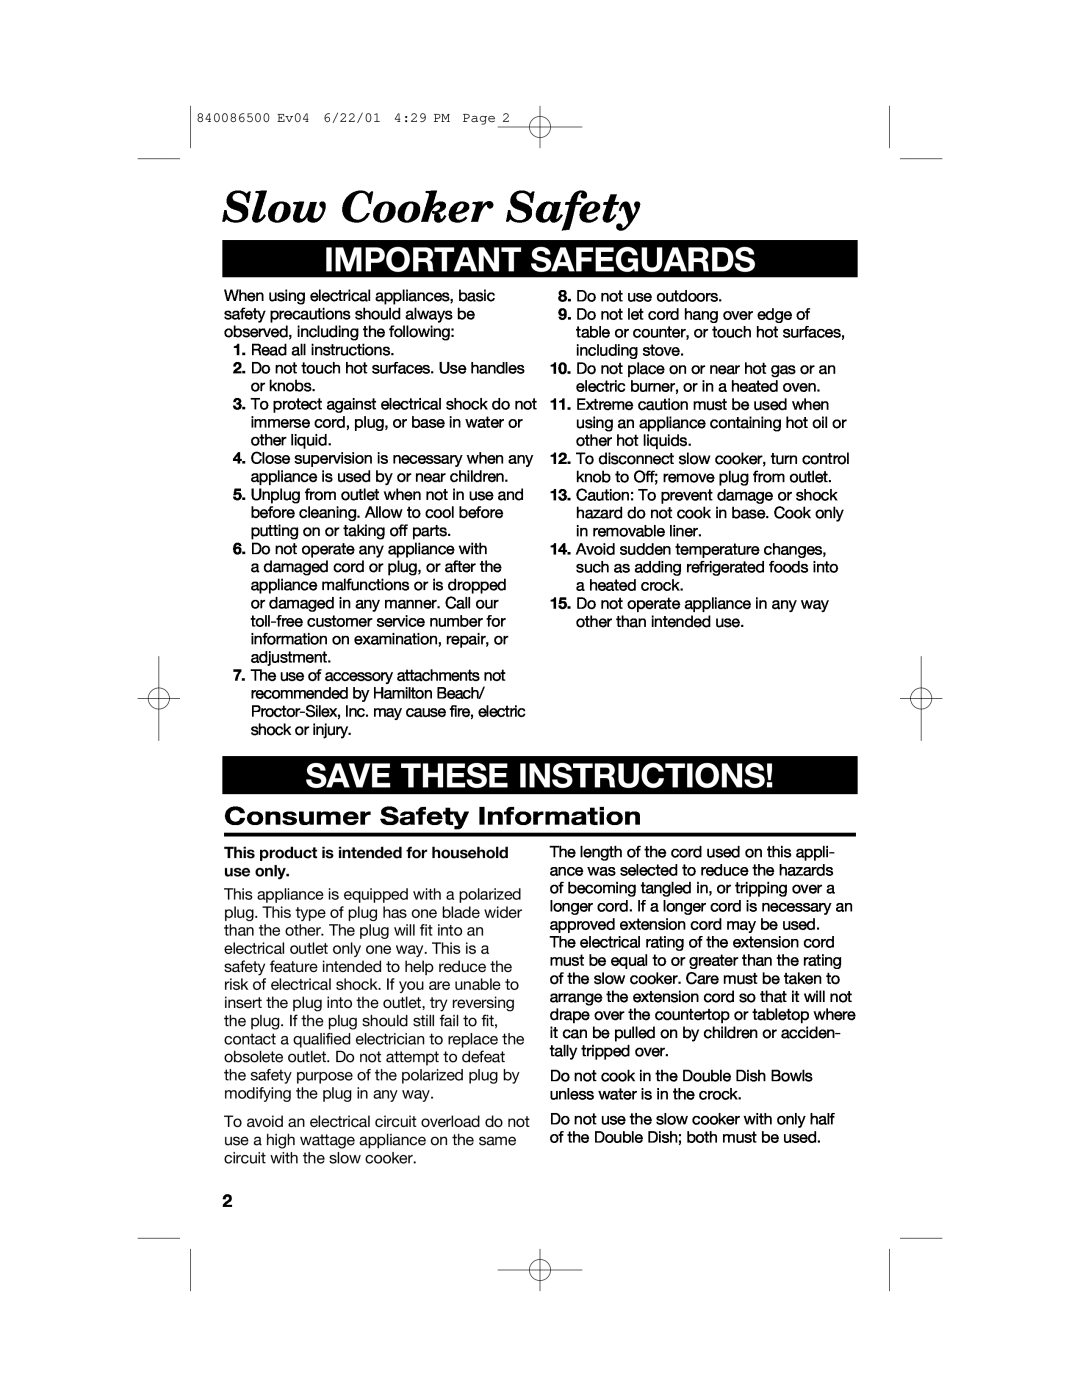 Hamilton Beach 33158 manual Slow Cooker Safety, Important Safeguards, Save These Instructions, Consumer Safety Information 